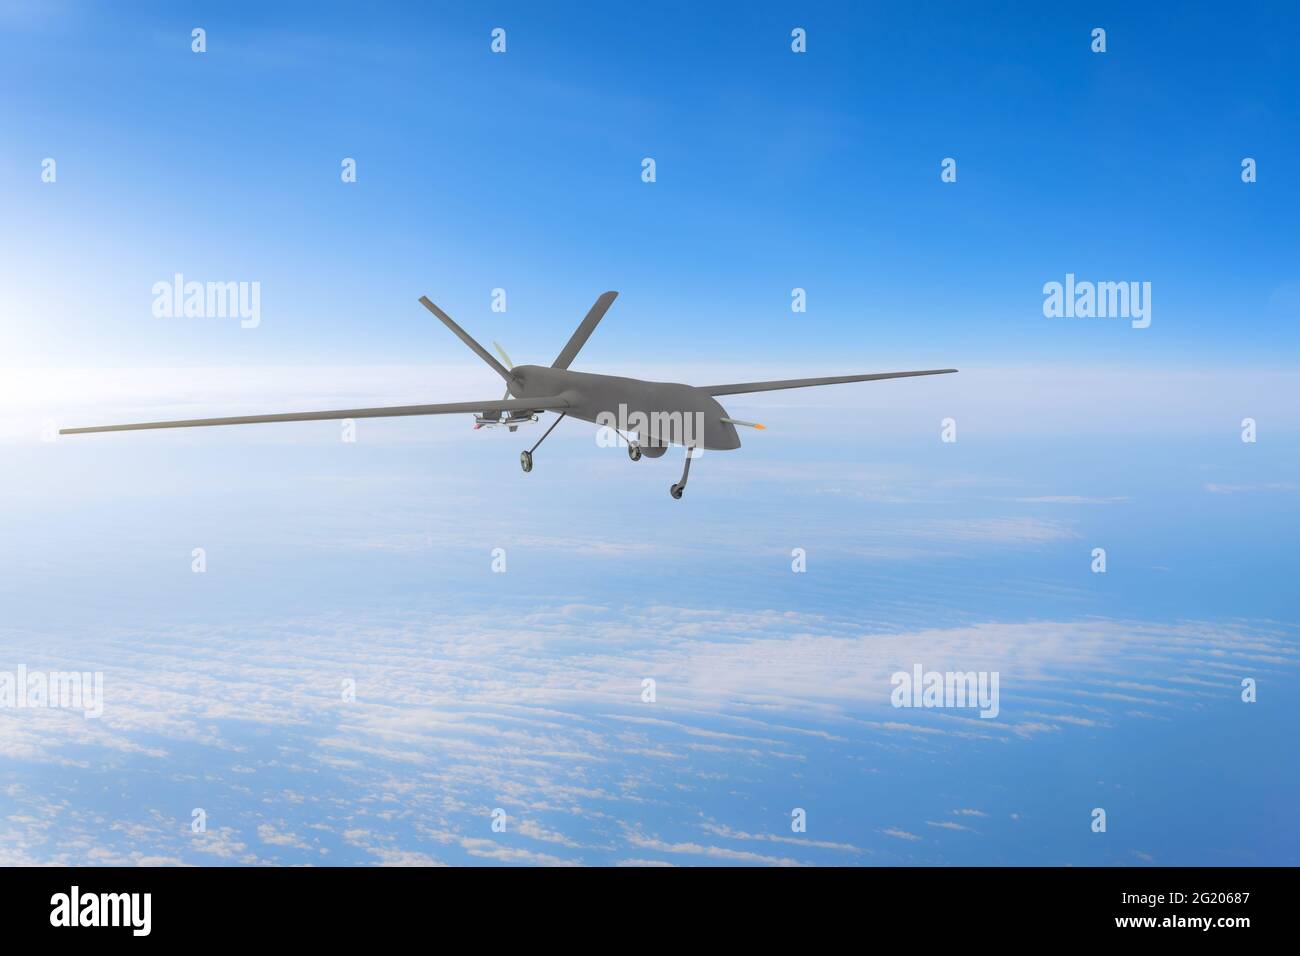 Unmanned military drone on patrol air at high altitude Stock Photo